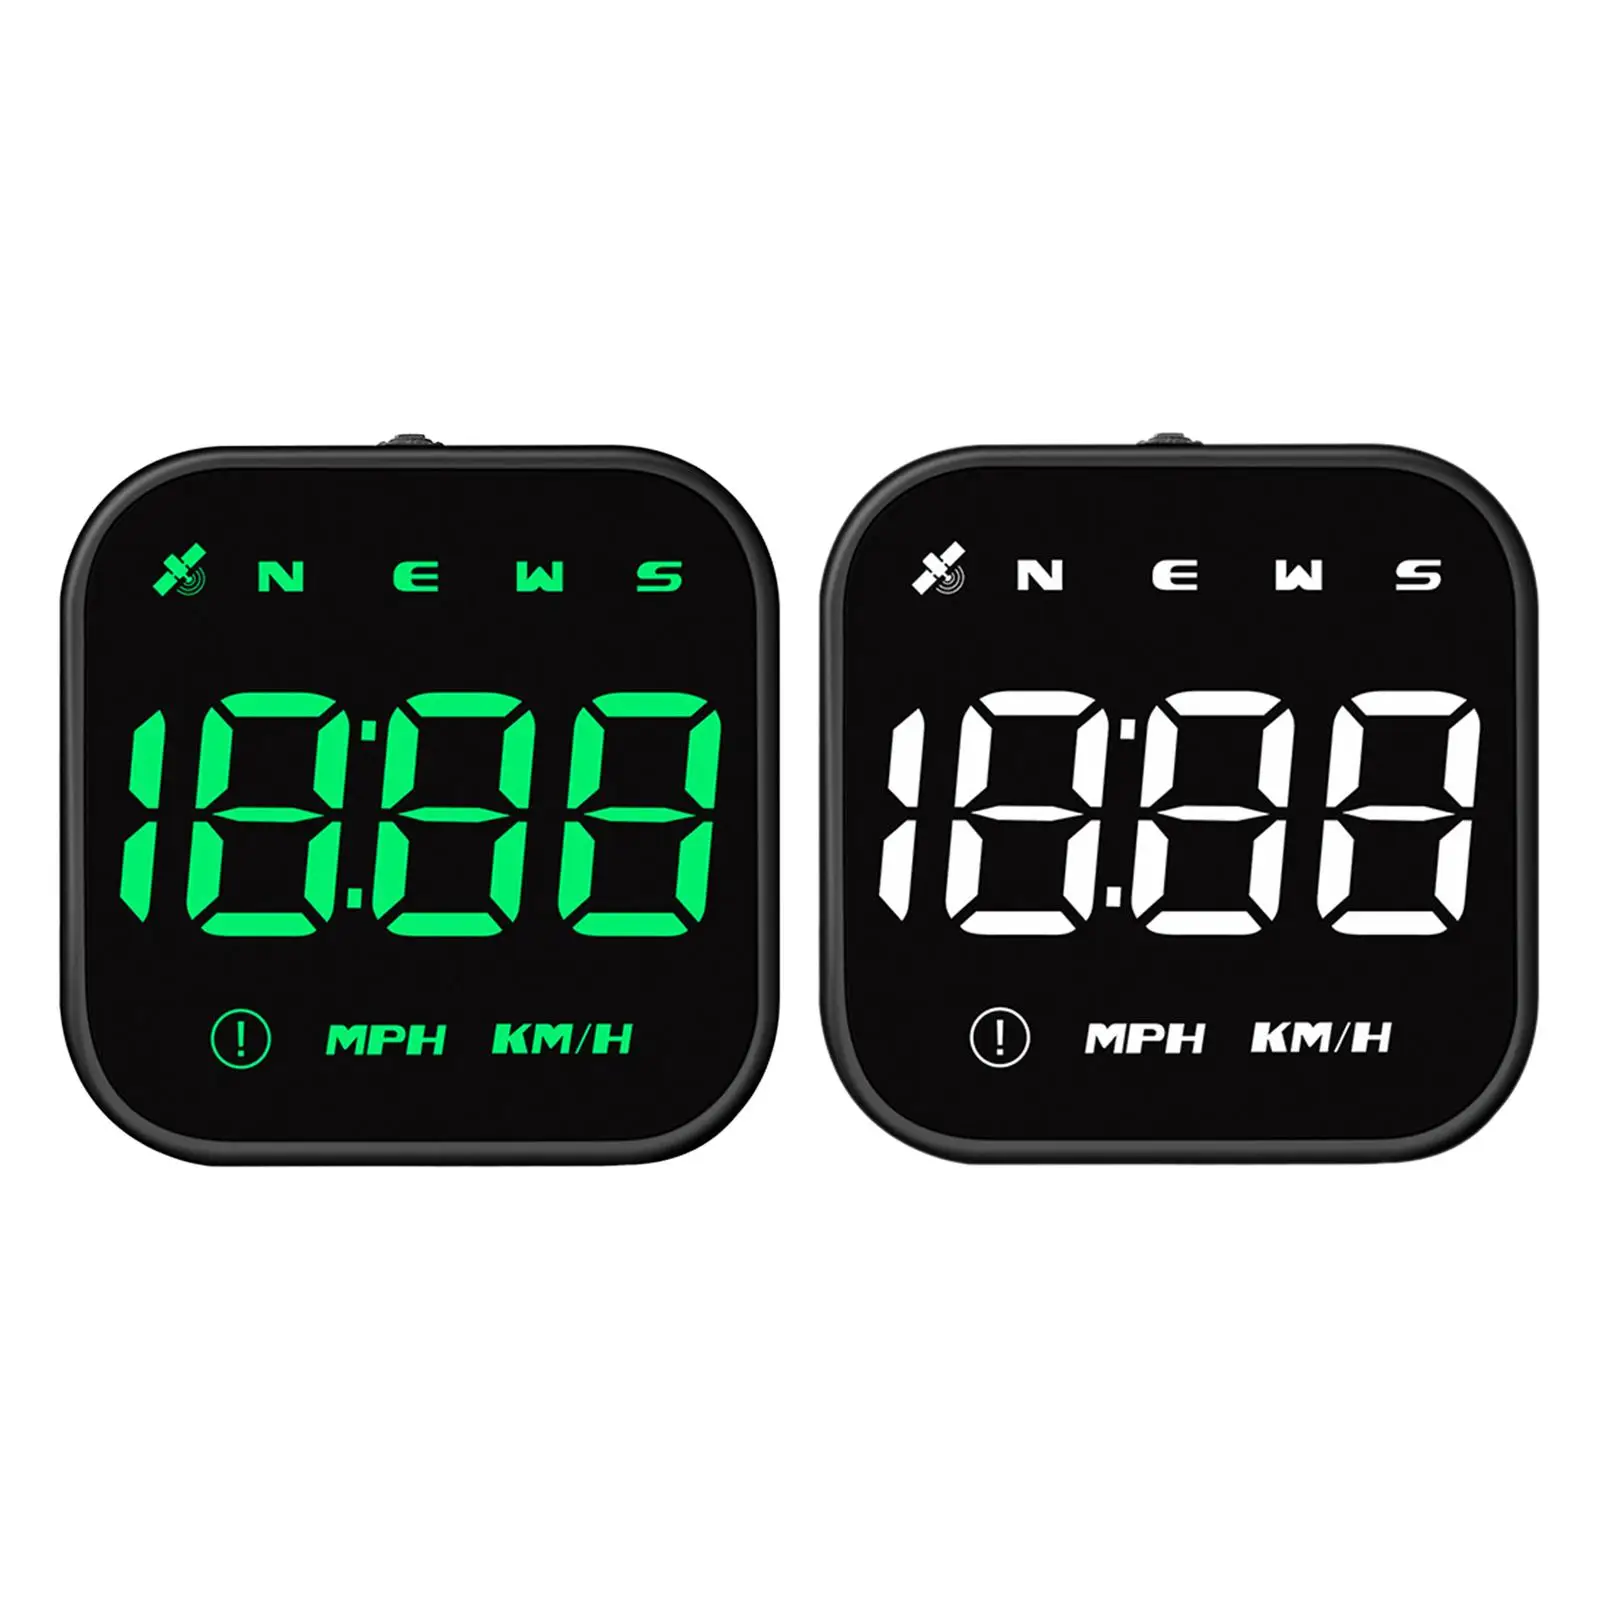 Car HUD Head up Display Tired Driving Alarm Multipurpose Car Accessories Universal over Speed Warning for Trucks Suvs Buses